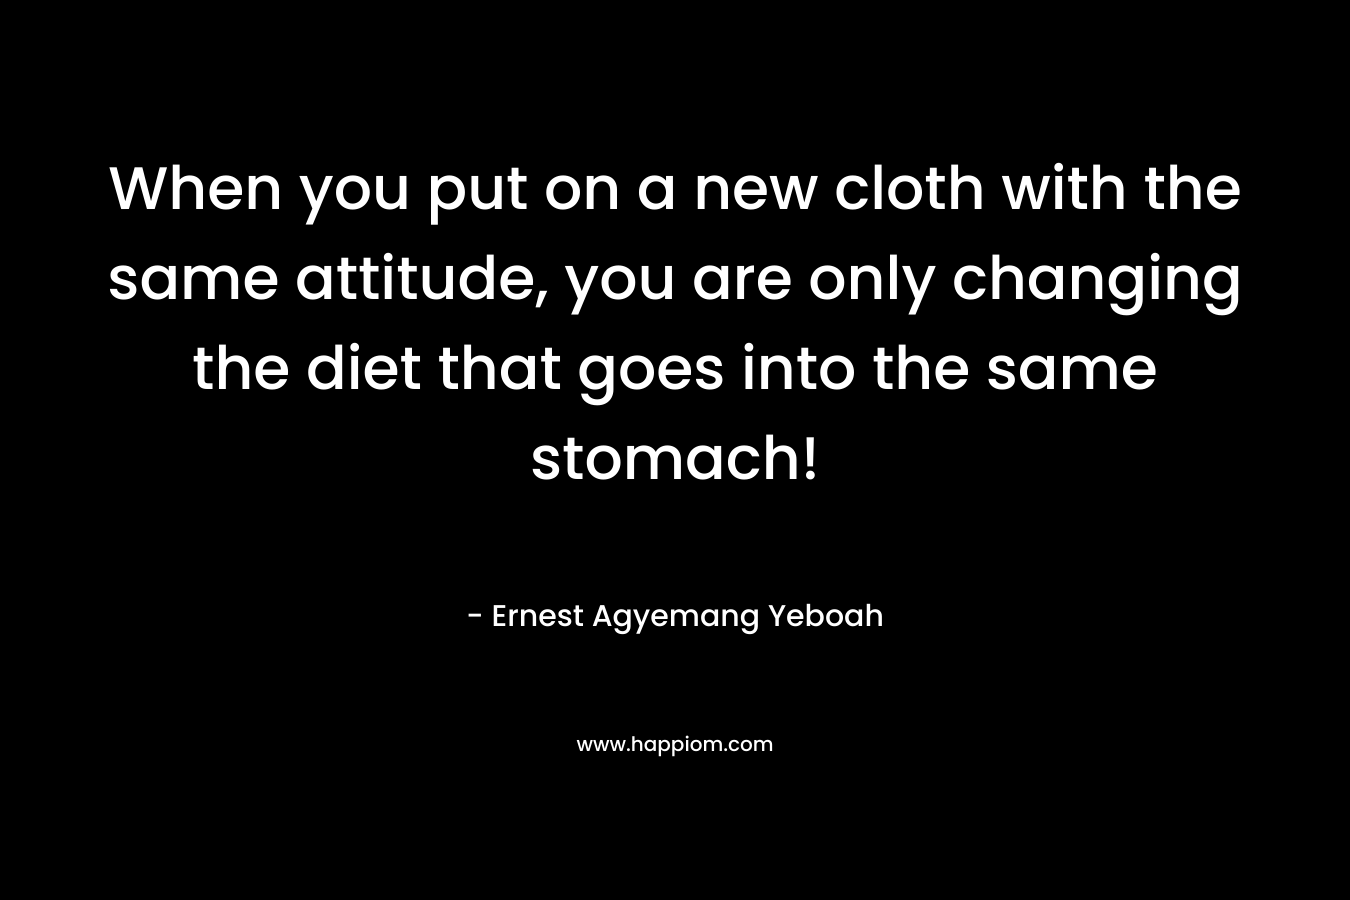 When you put on a new cloth with the same attitude, you are only changing the diet that goes into the same stomach!